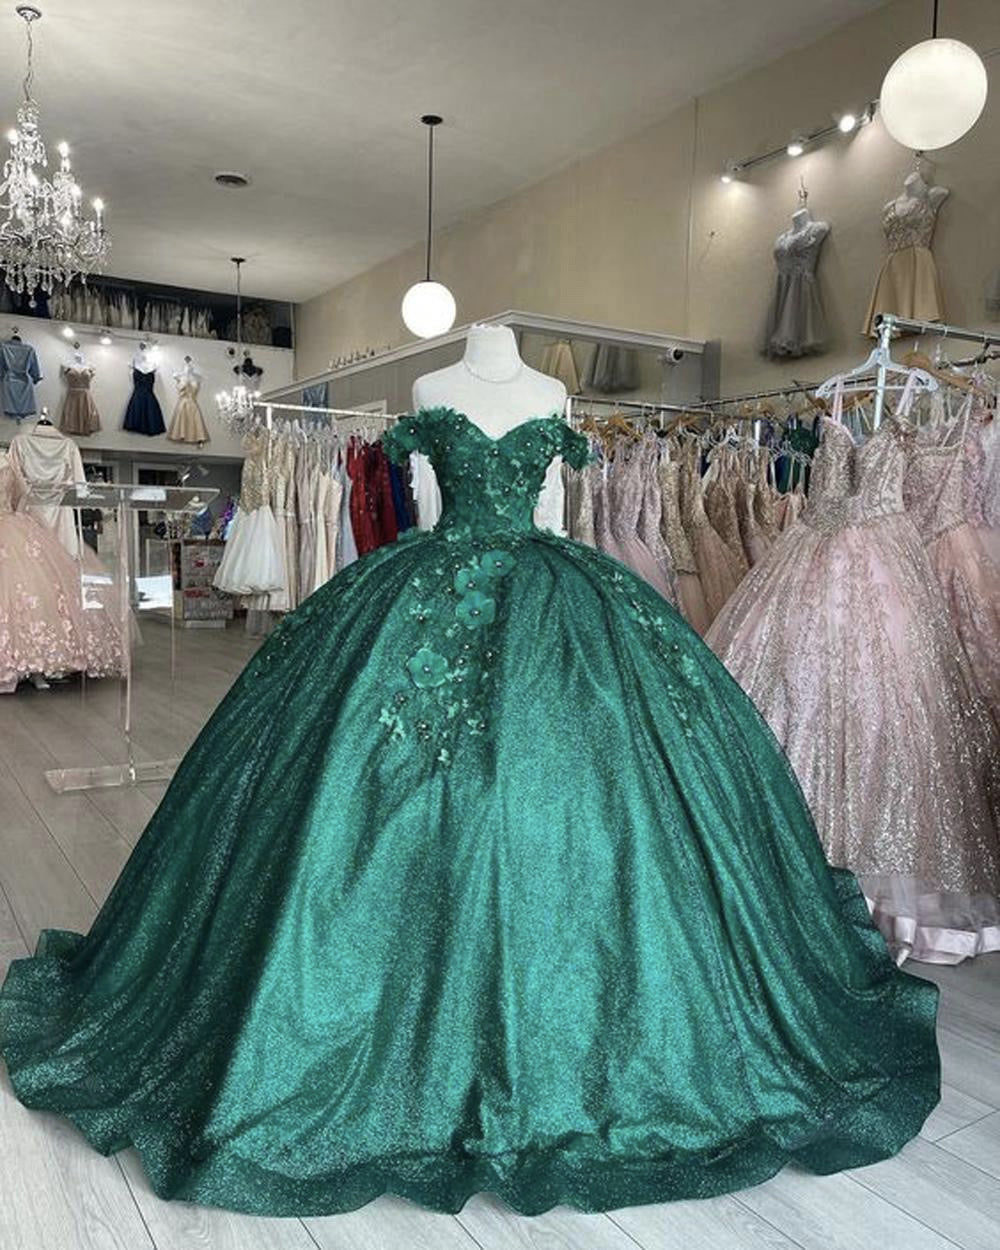 Luxury Puffy Emerald Green Ball Gown for Prom Formal Dress